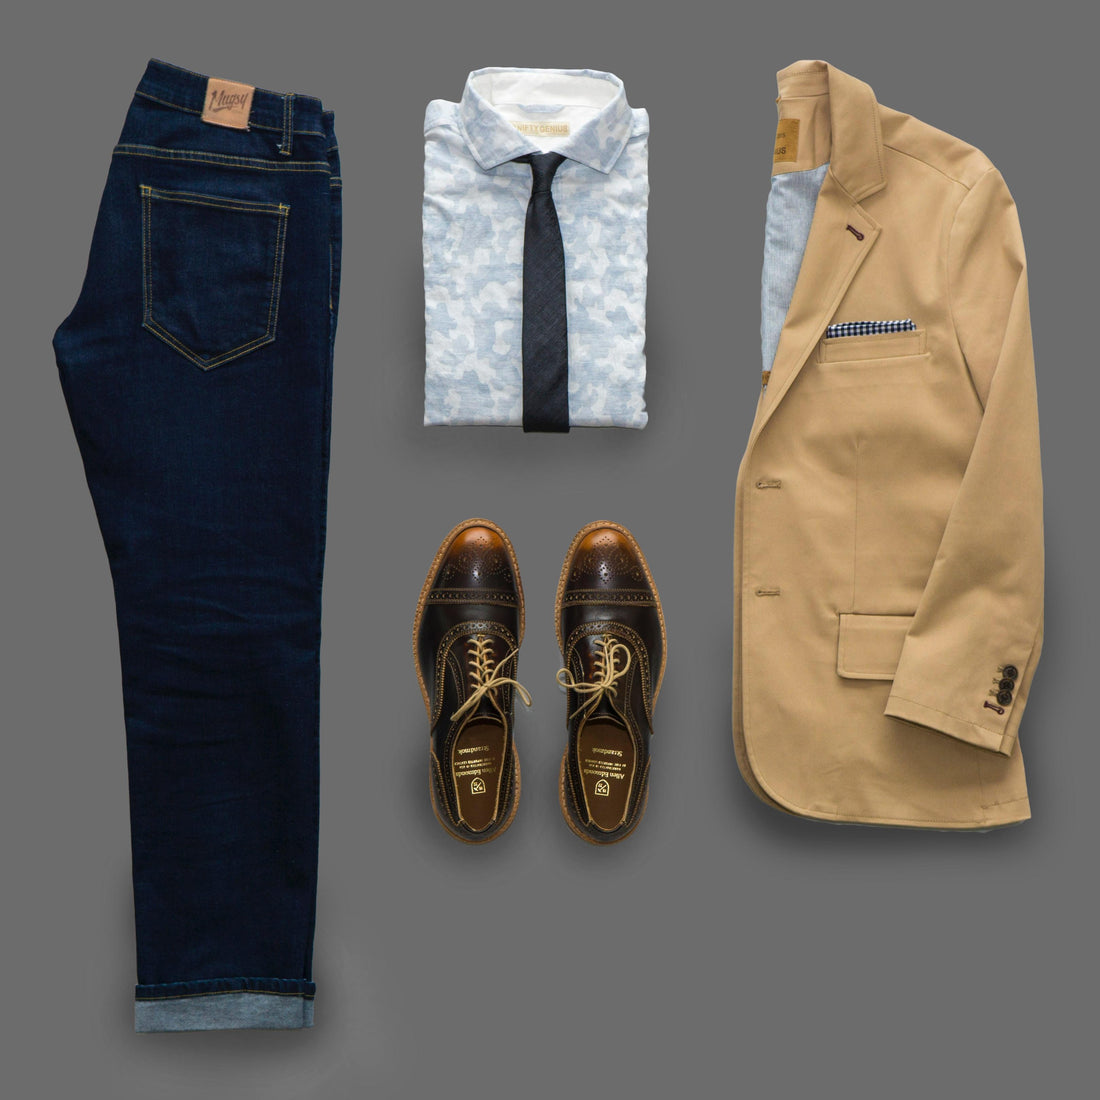 How To Pair Dress Shoes With Jeans